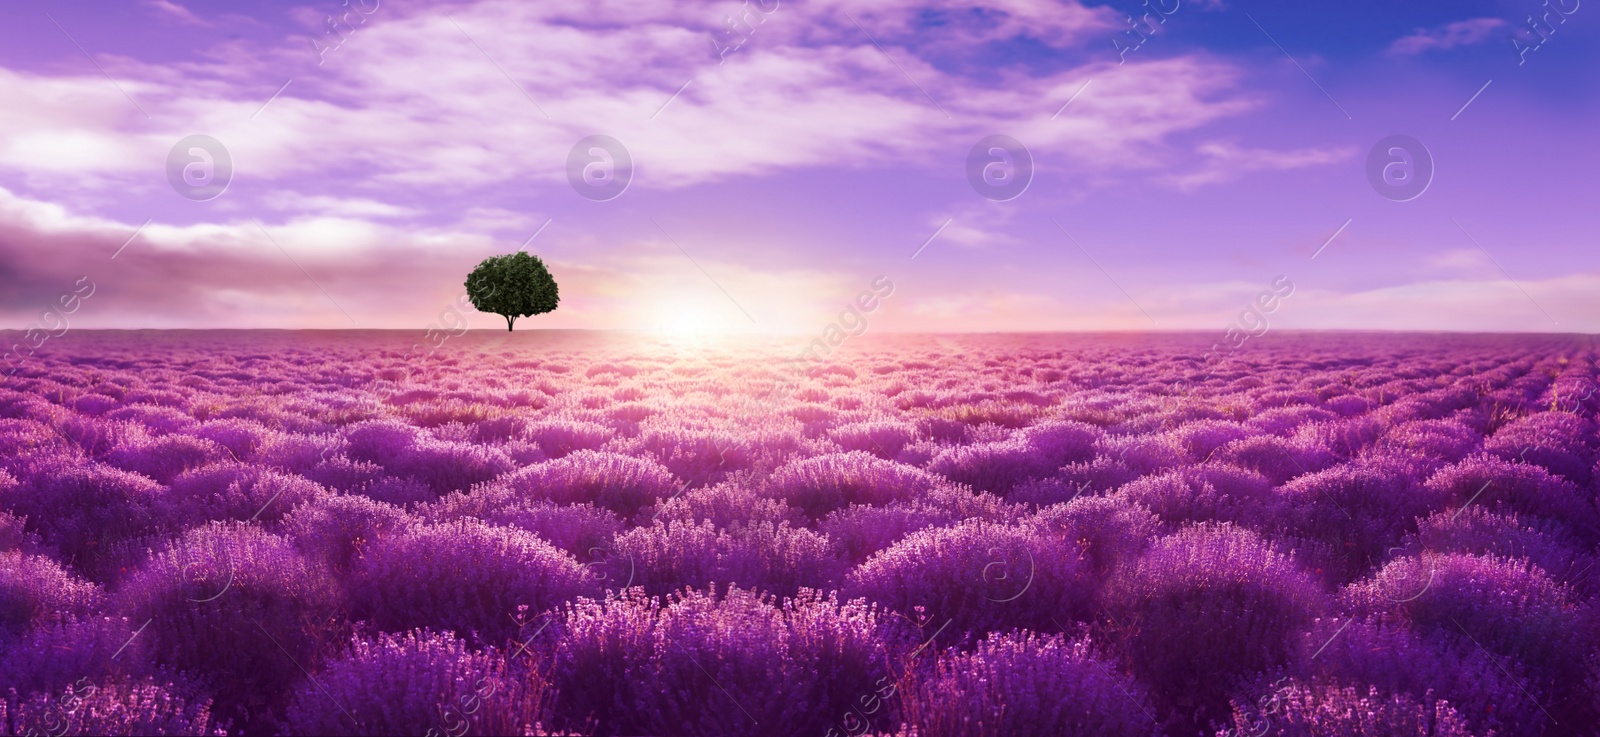 Image of Beautiful lavender field with single tree under amazing sky at sunset